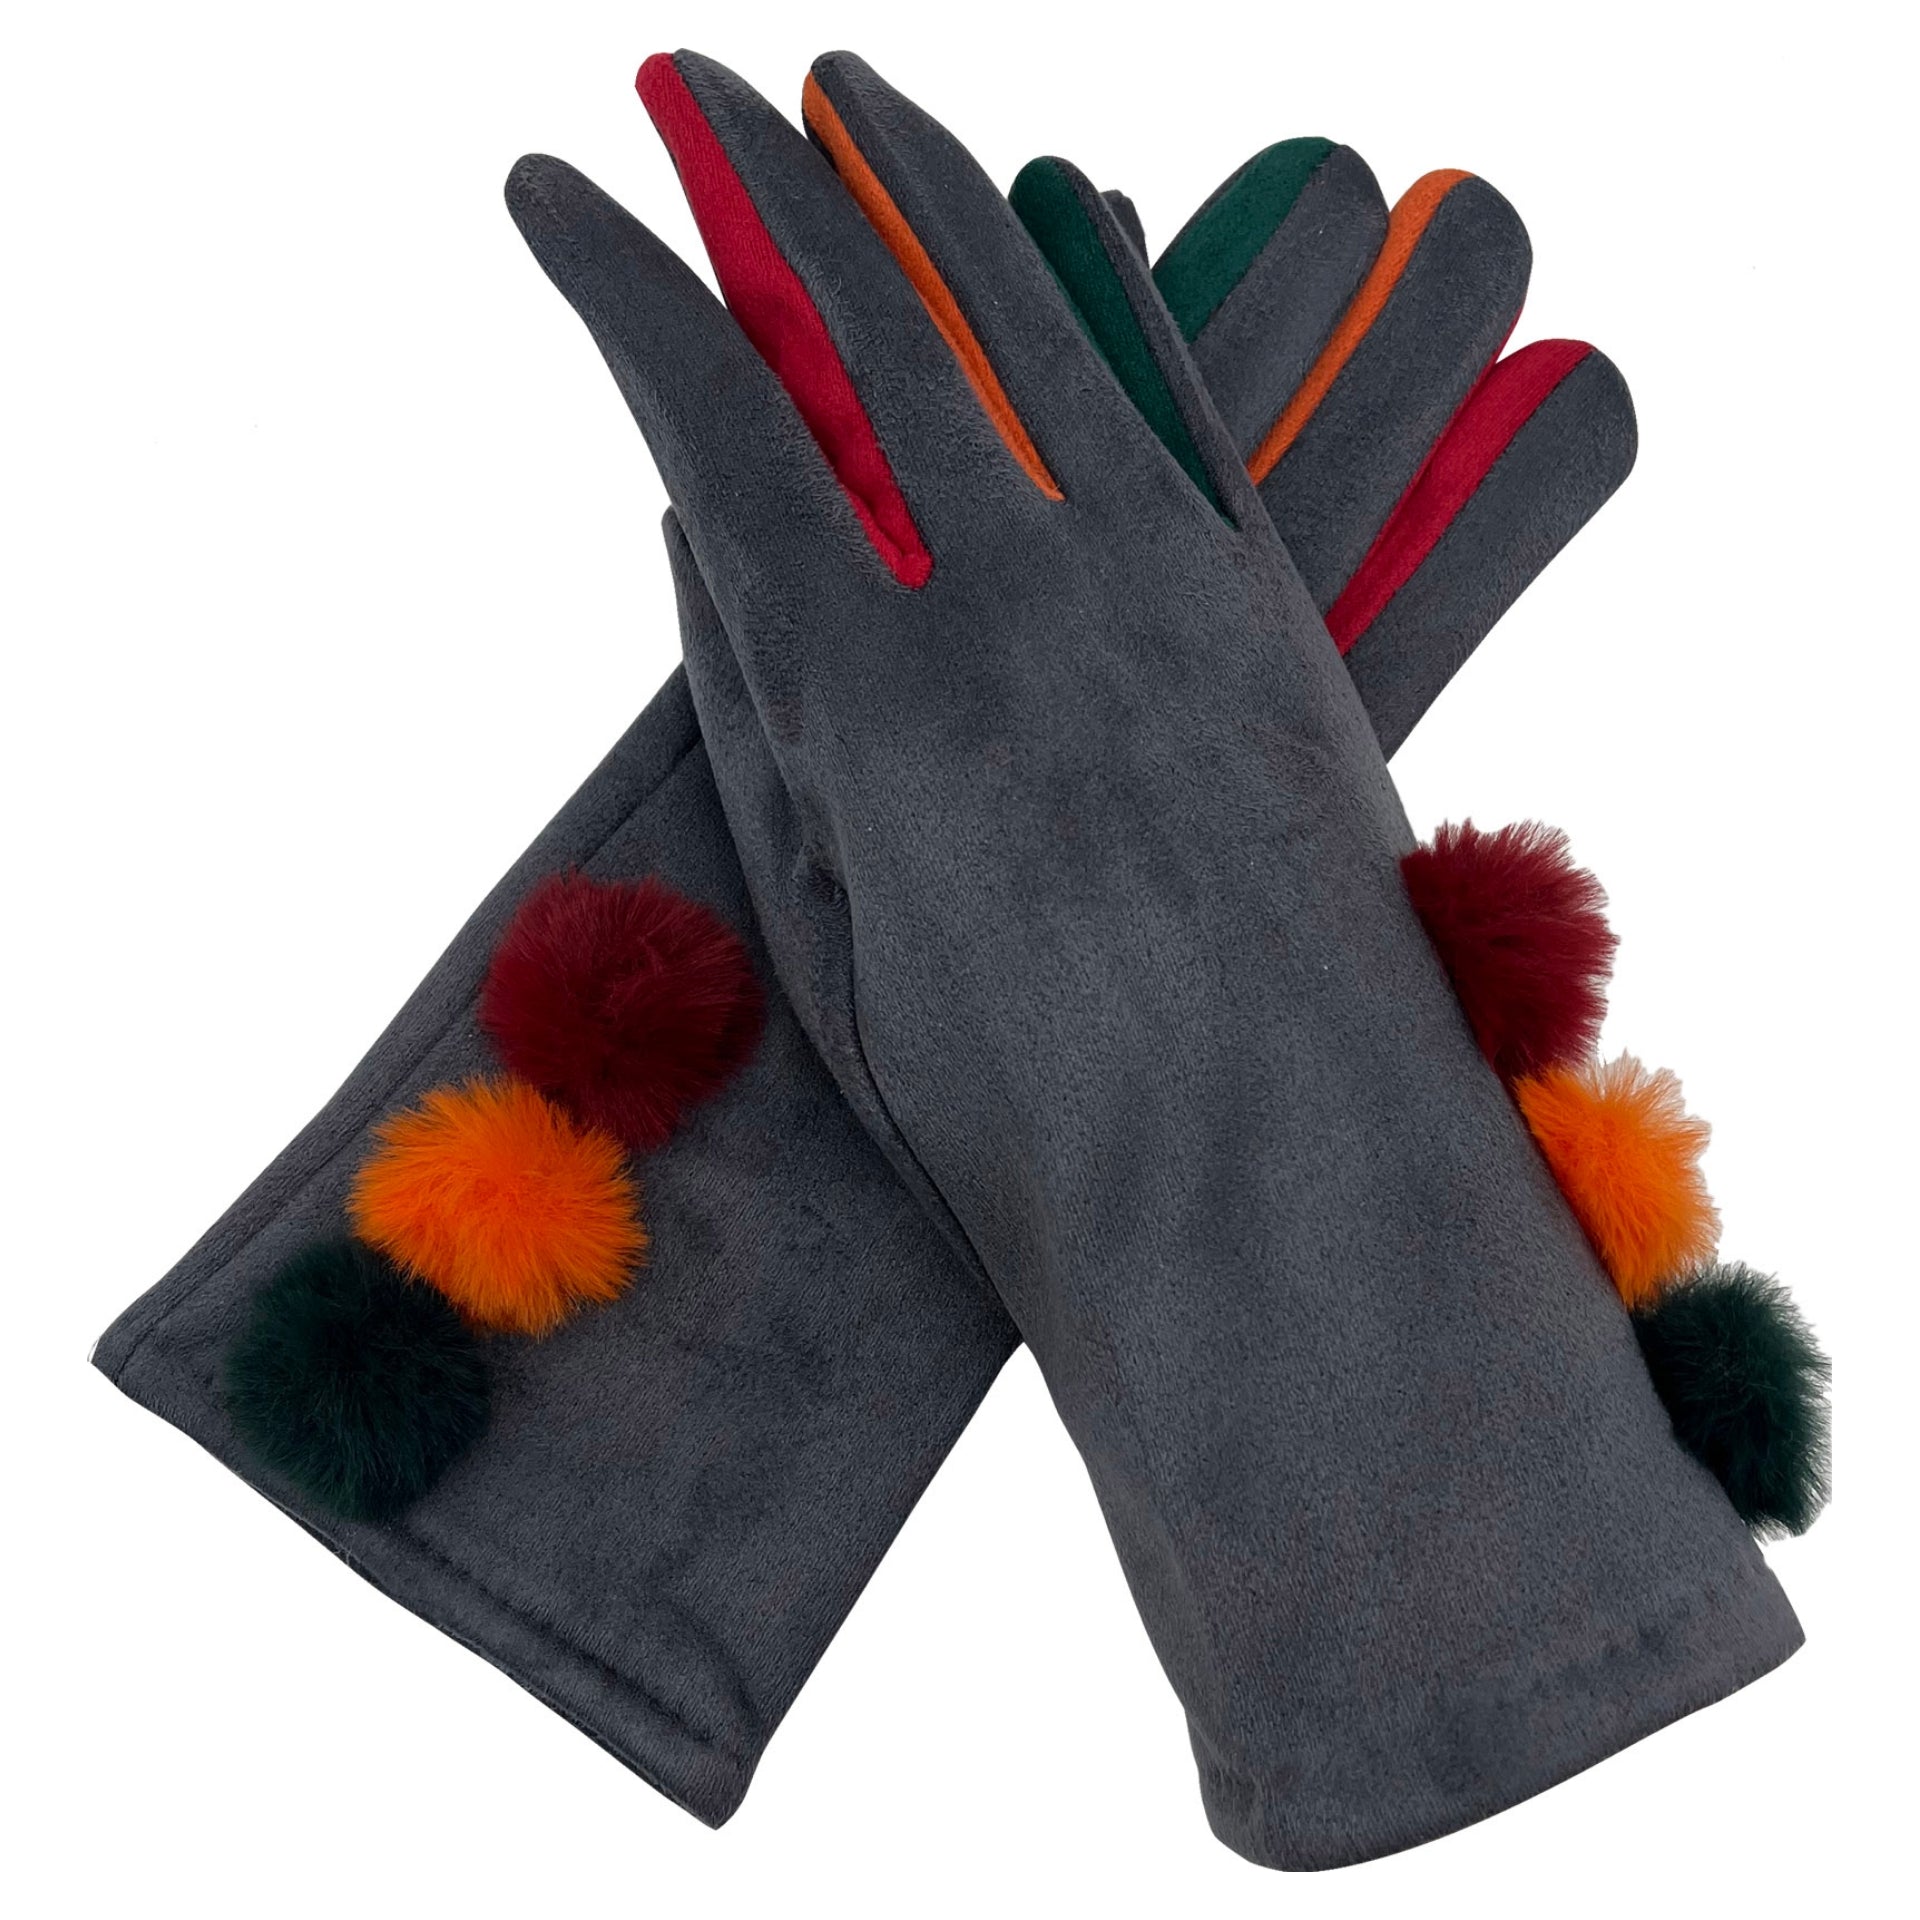 Ladies Soft Synthetic Leather Gloves Walking Driving Winter Warm Fur Lined grey